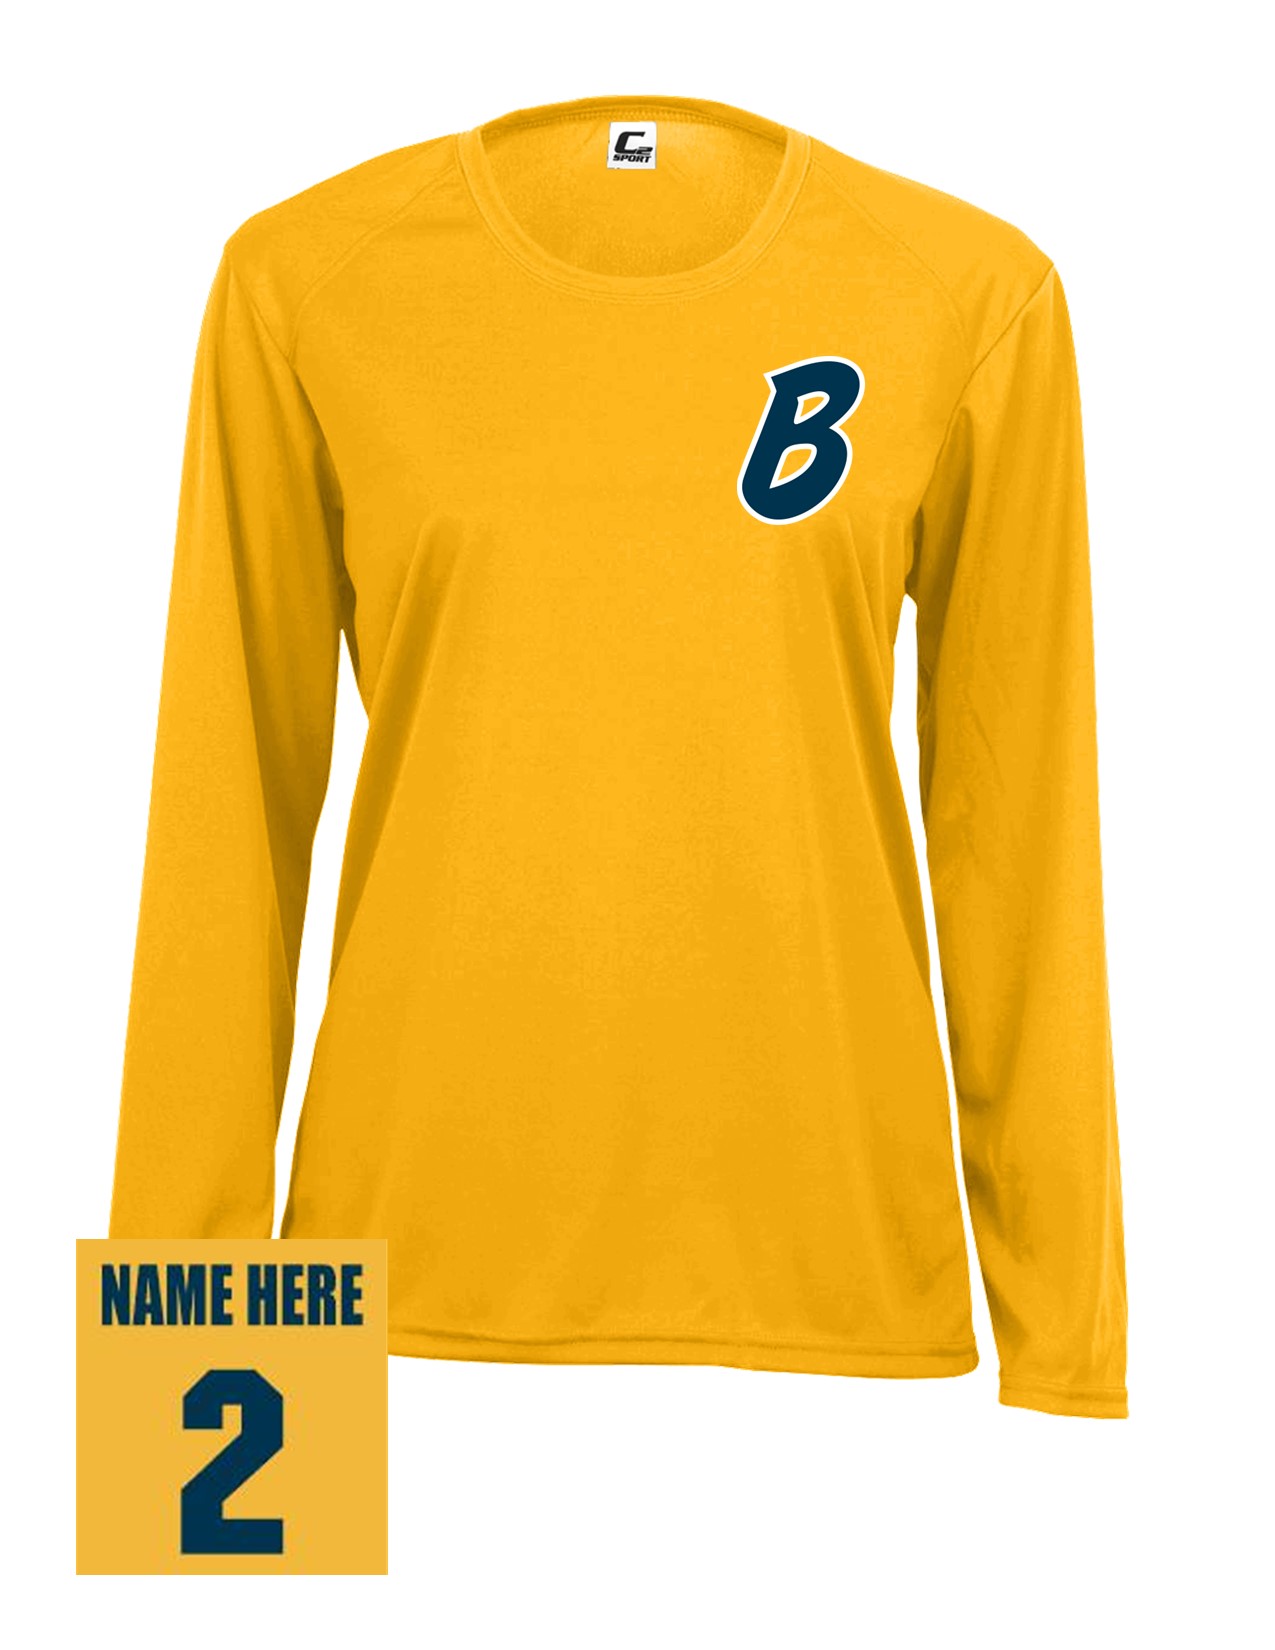 58b Badger 5604 Ladies C2 Performance 100% Poly Wicking Long Sleeve T-Shirt with Bombers "B" LC Logo